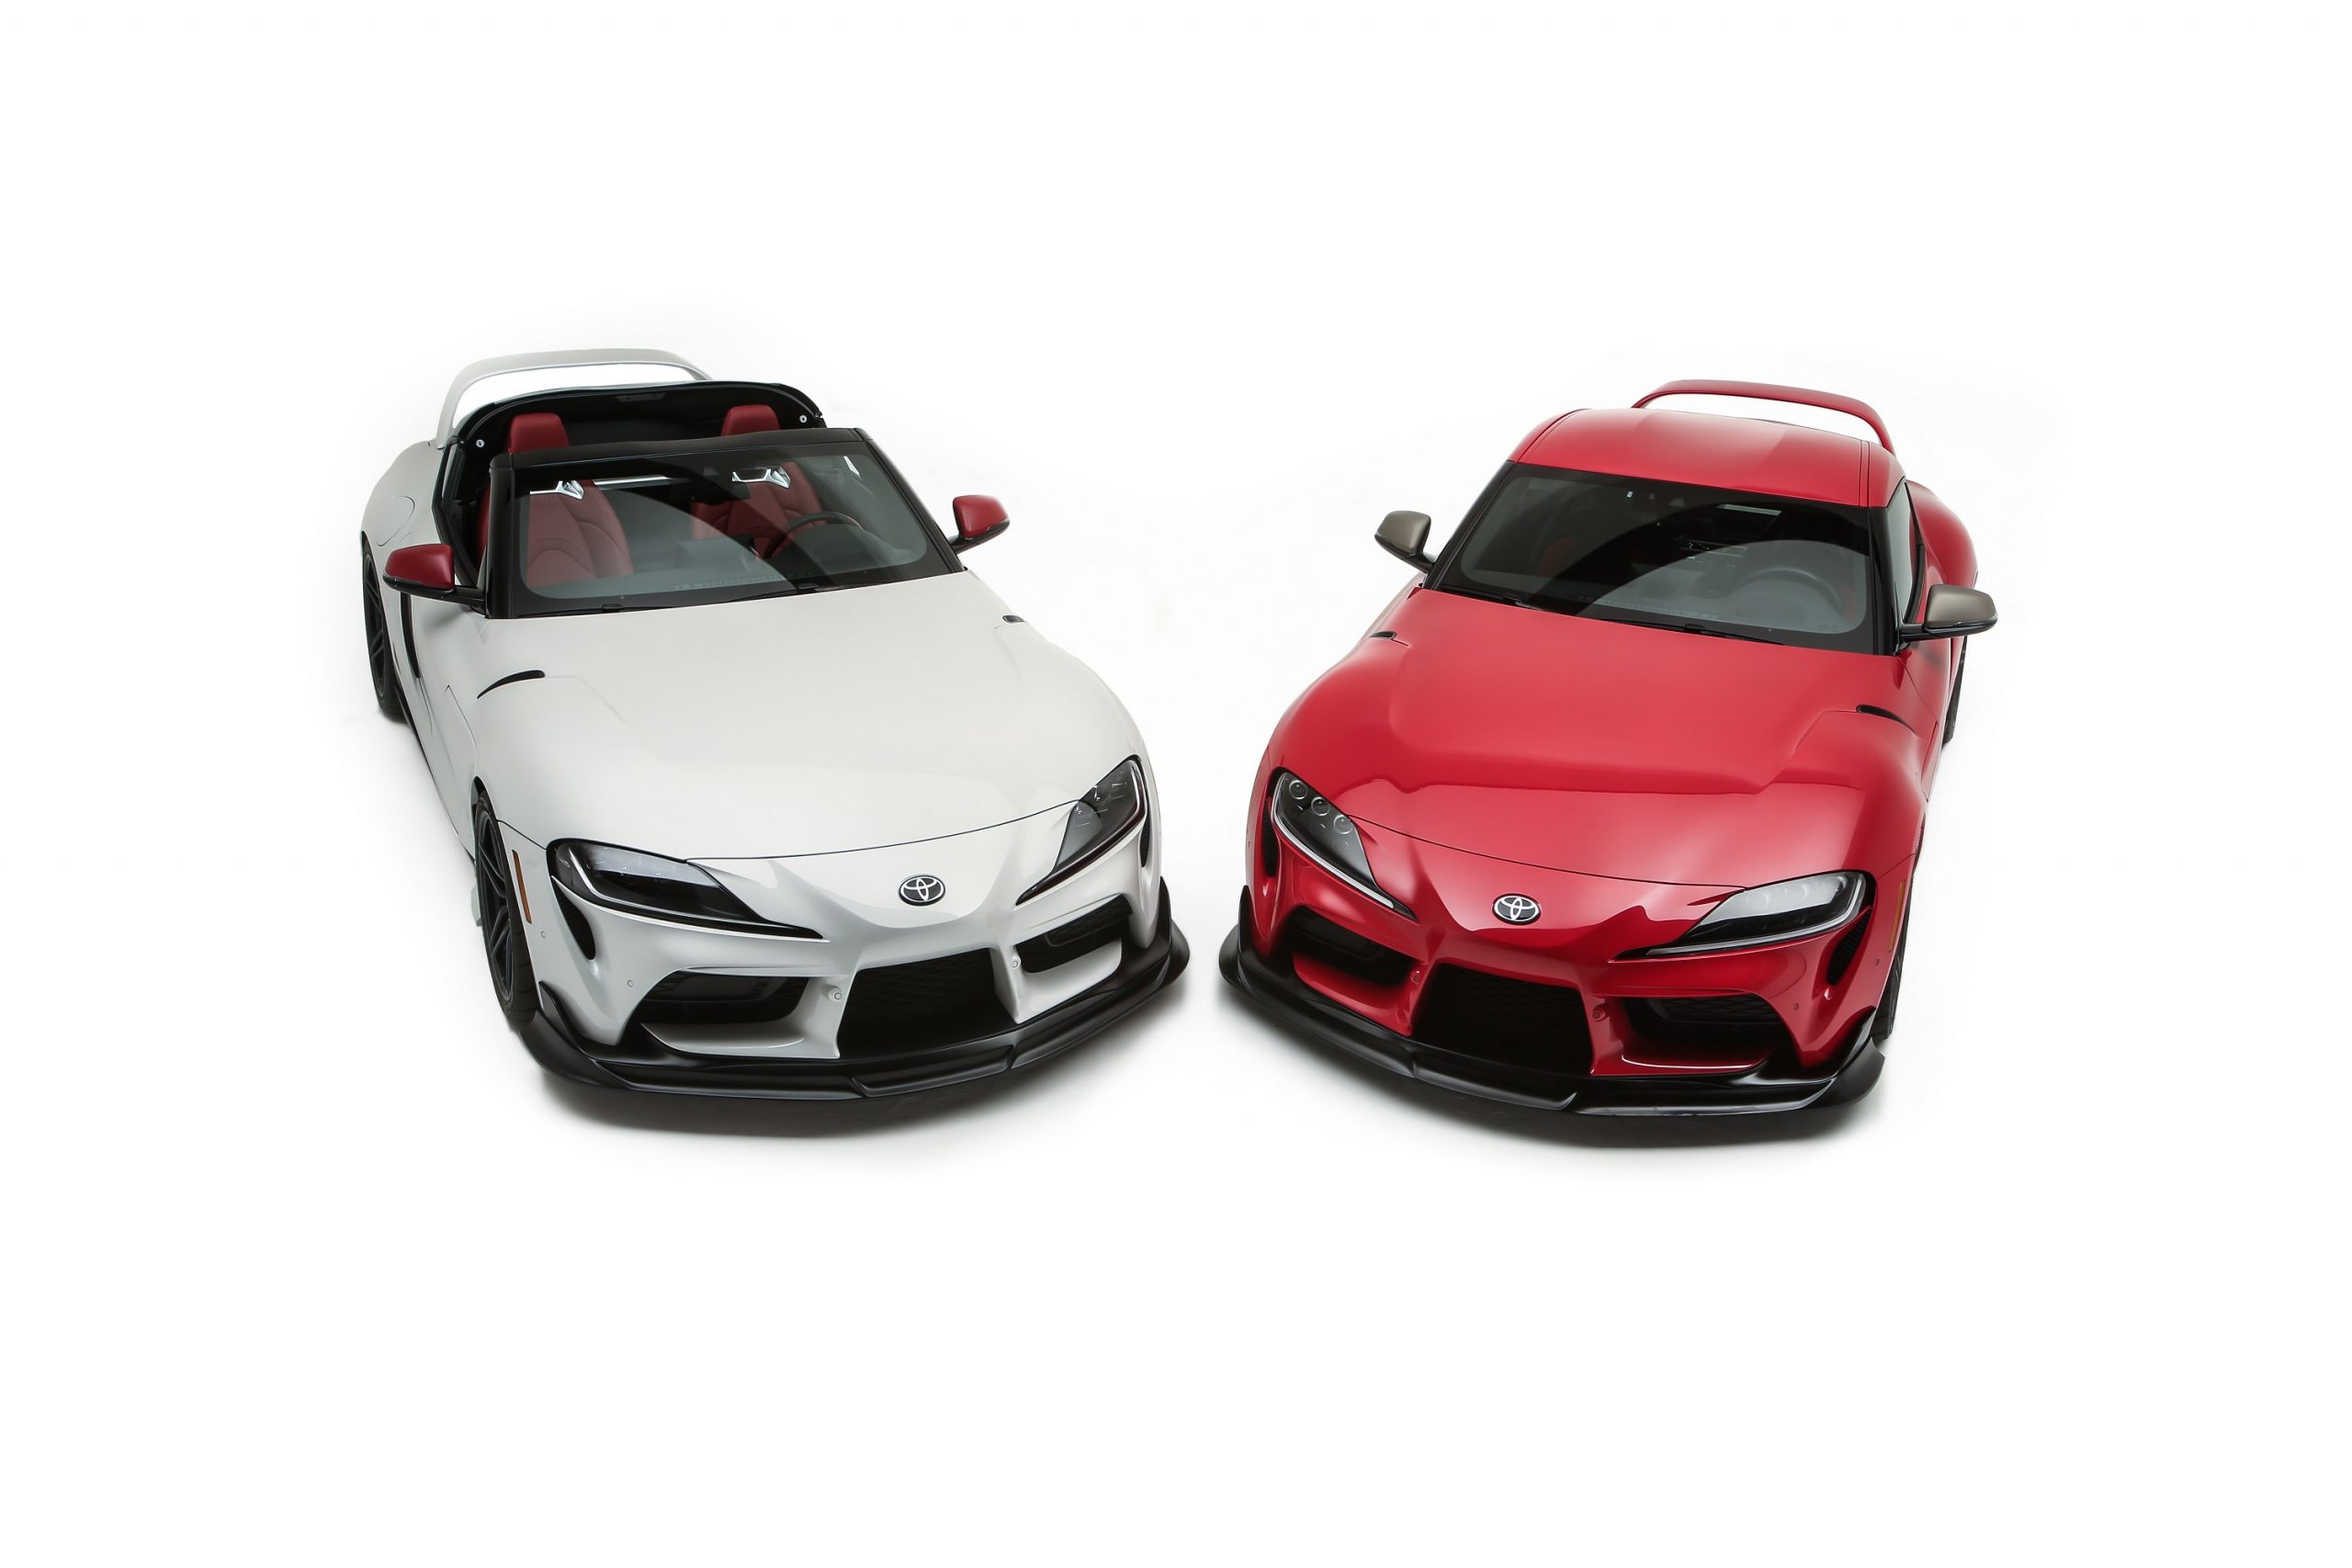 The front of two new Supra Heritage models in white and red respectively, made for SEMA 2021